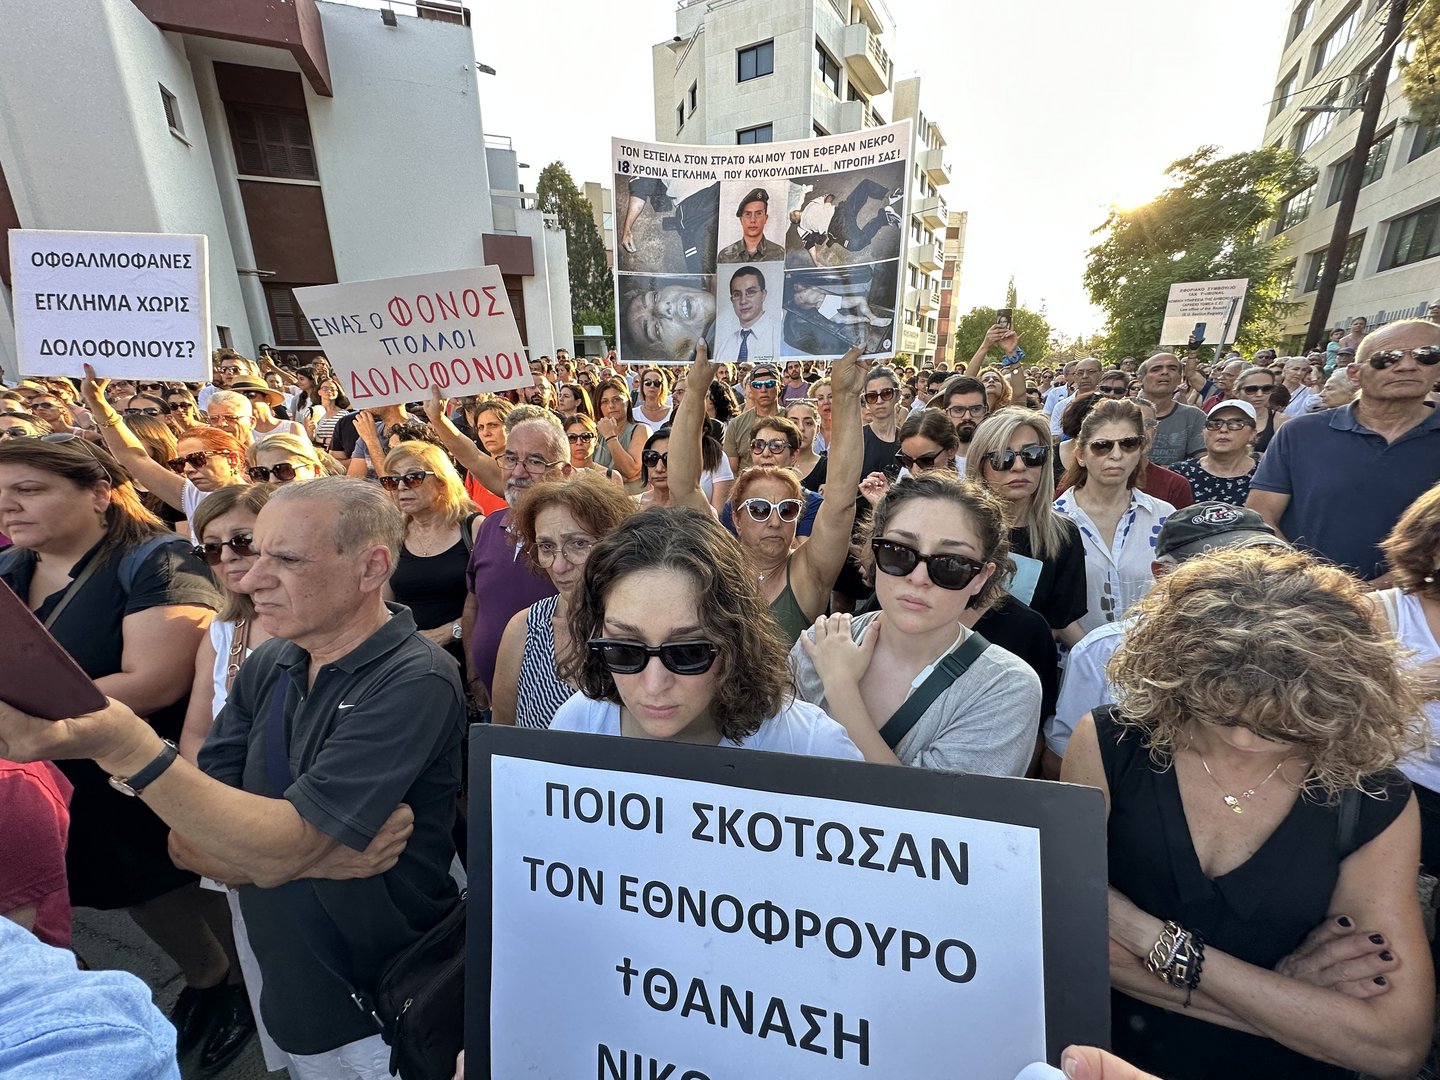 image We demand justice: hundreds protest in Thanasis Nicolaou case (Updated, with video)